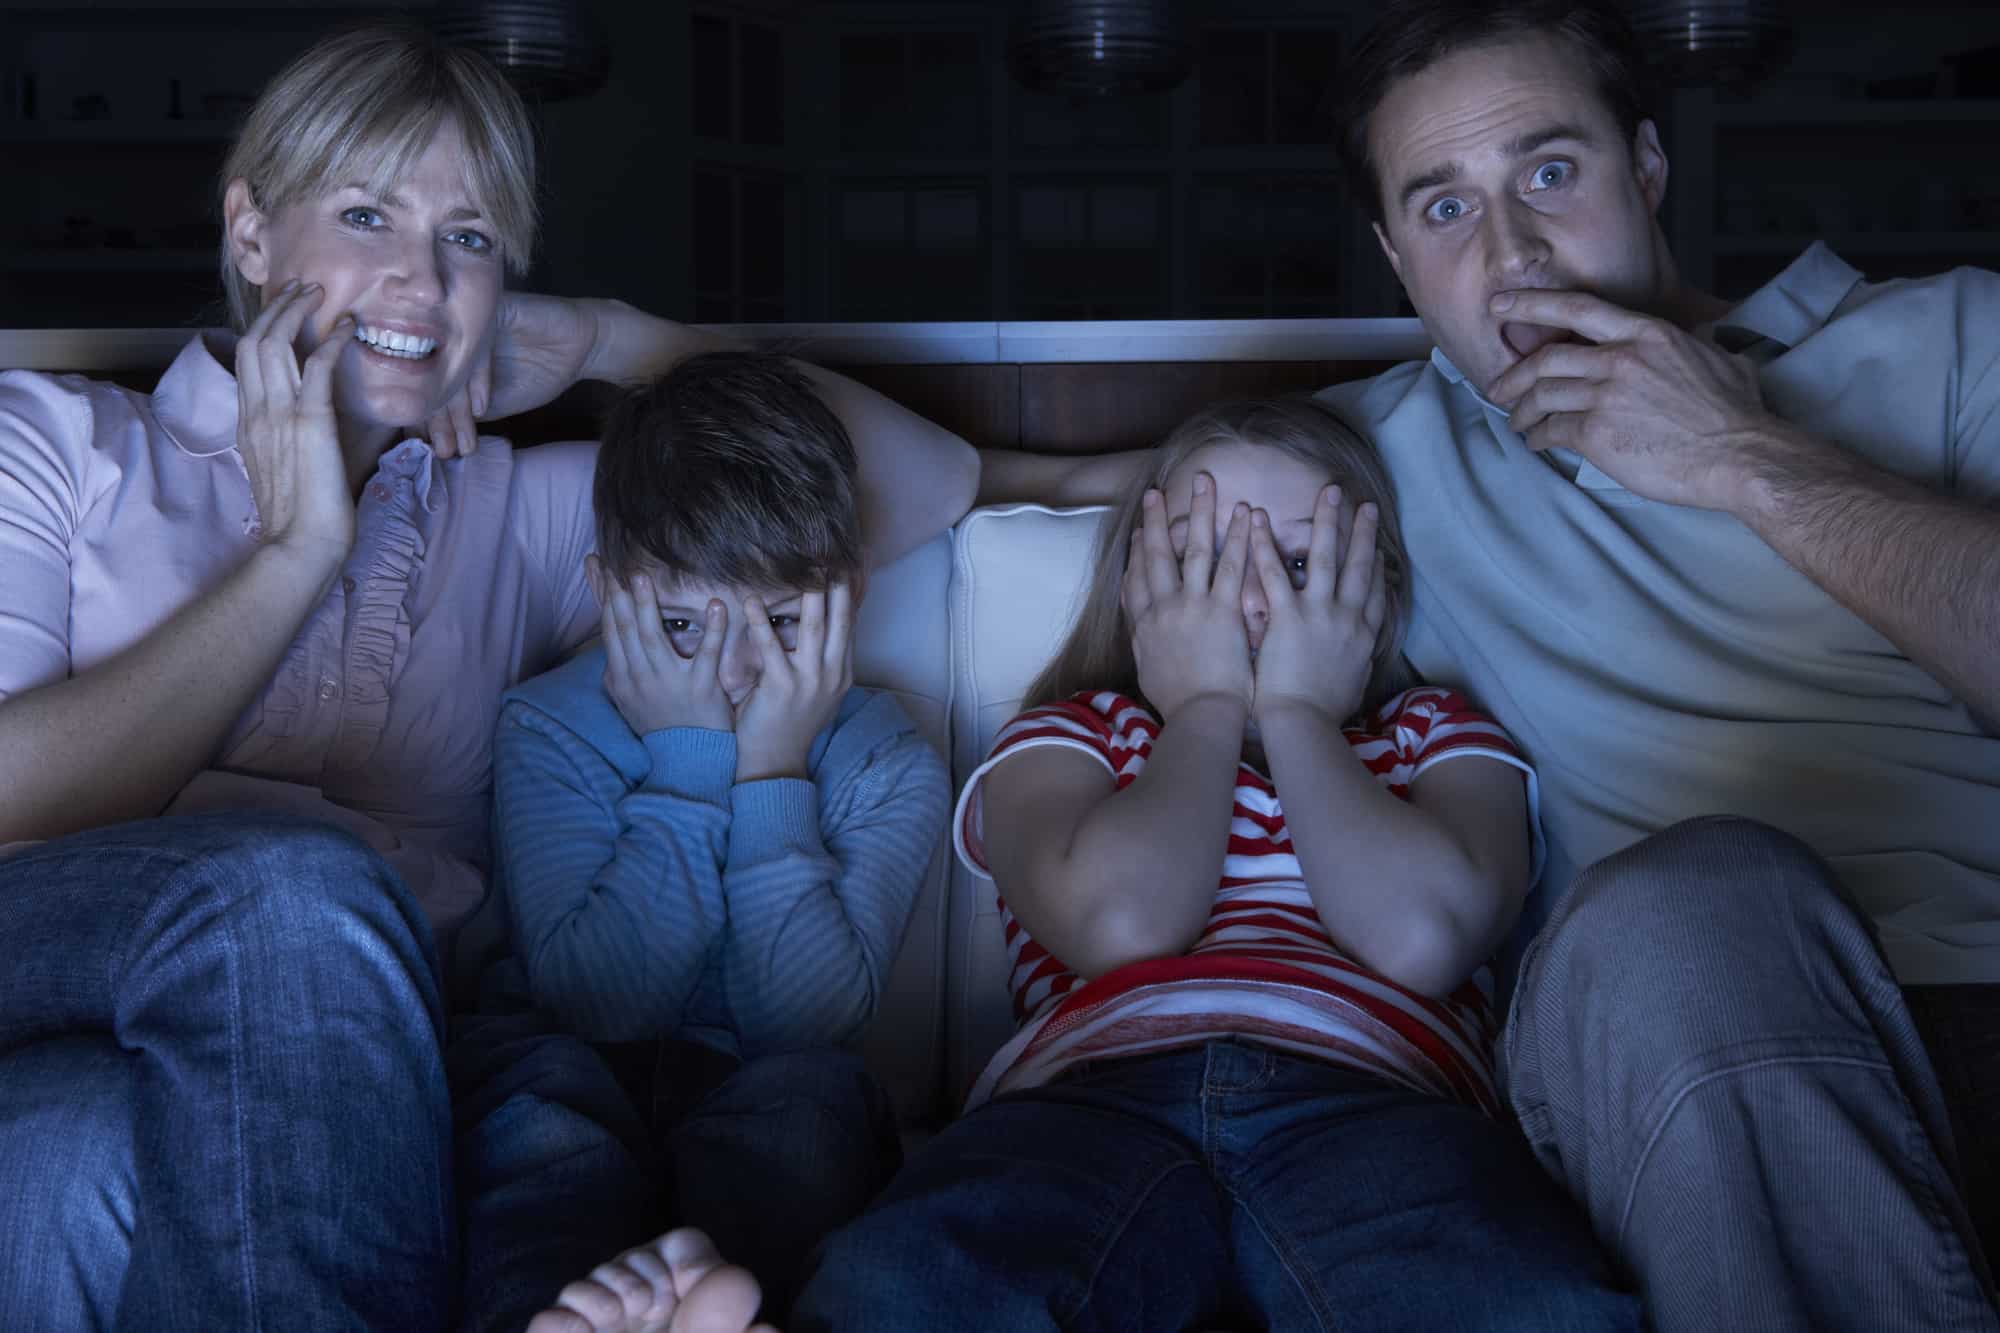 Does your family enjoy watching scary movies? Grab our list of over 100 of the best family Halloween movies on Made in a Pinch and follow us on Pinterest!1